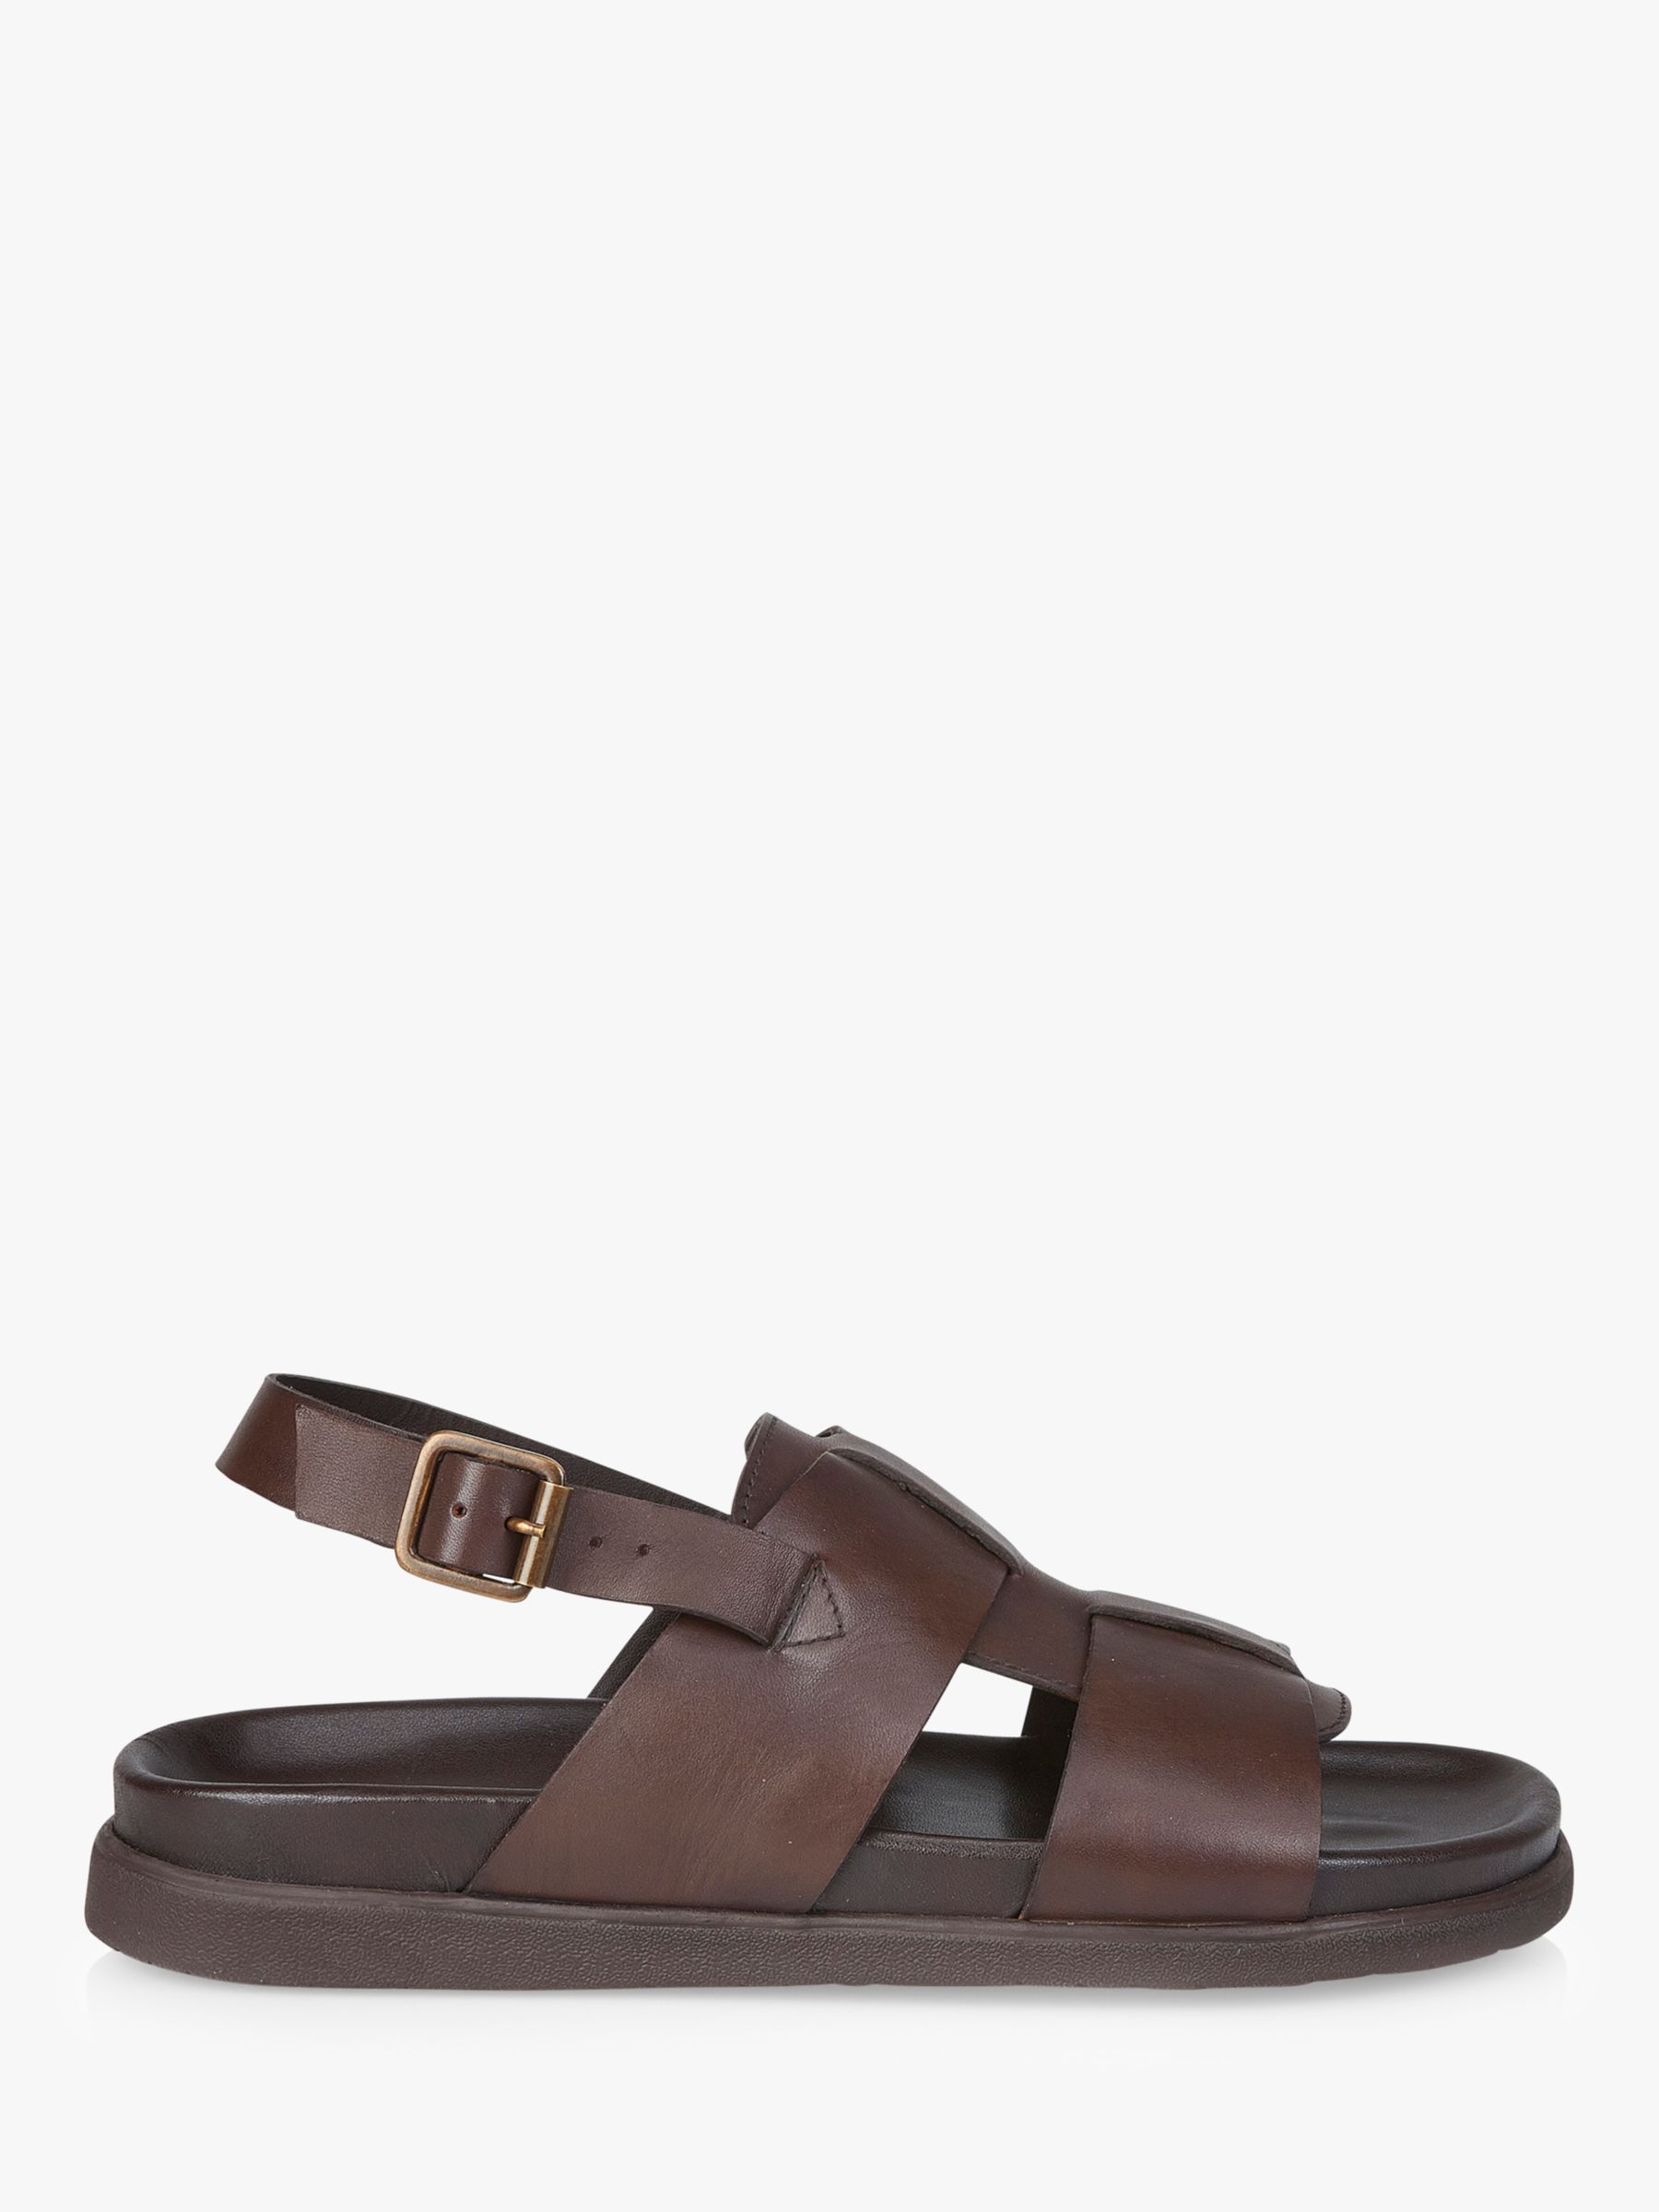 Silver Street London Tuscon Leather Sandals, Brown at John Lewis & Partners